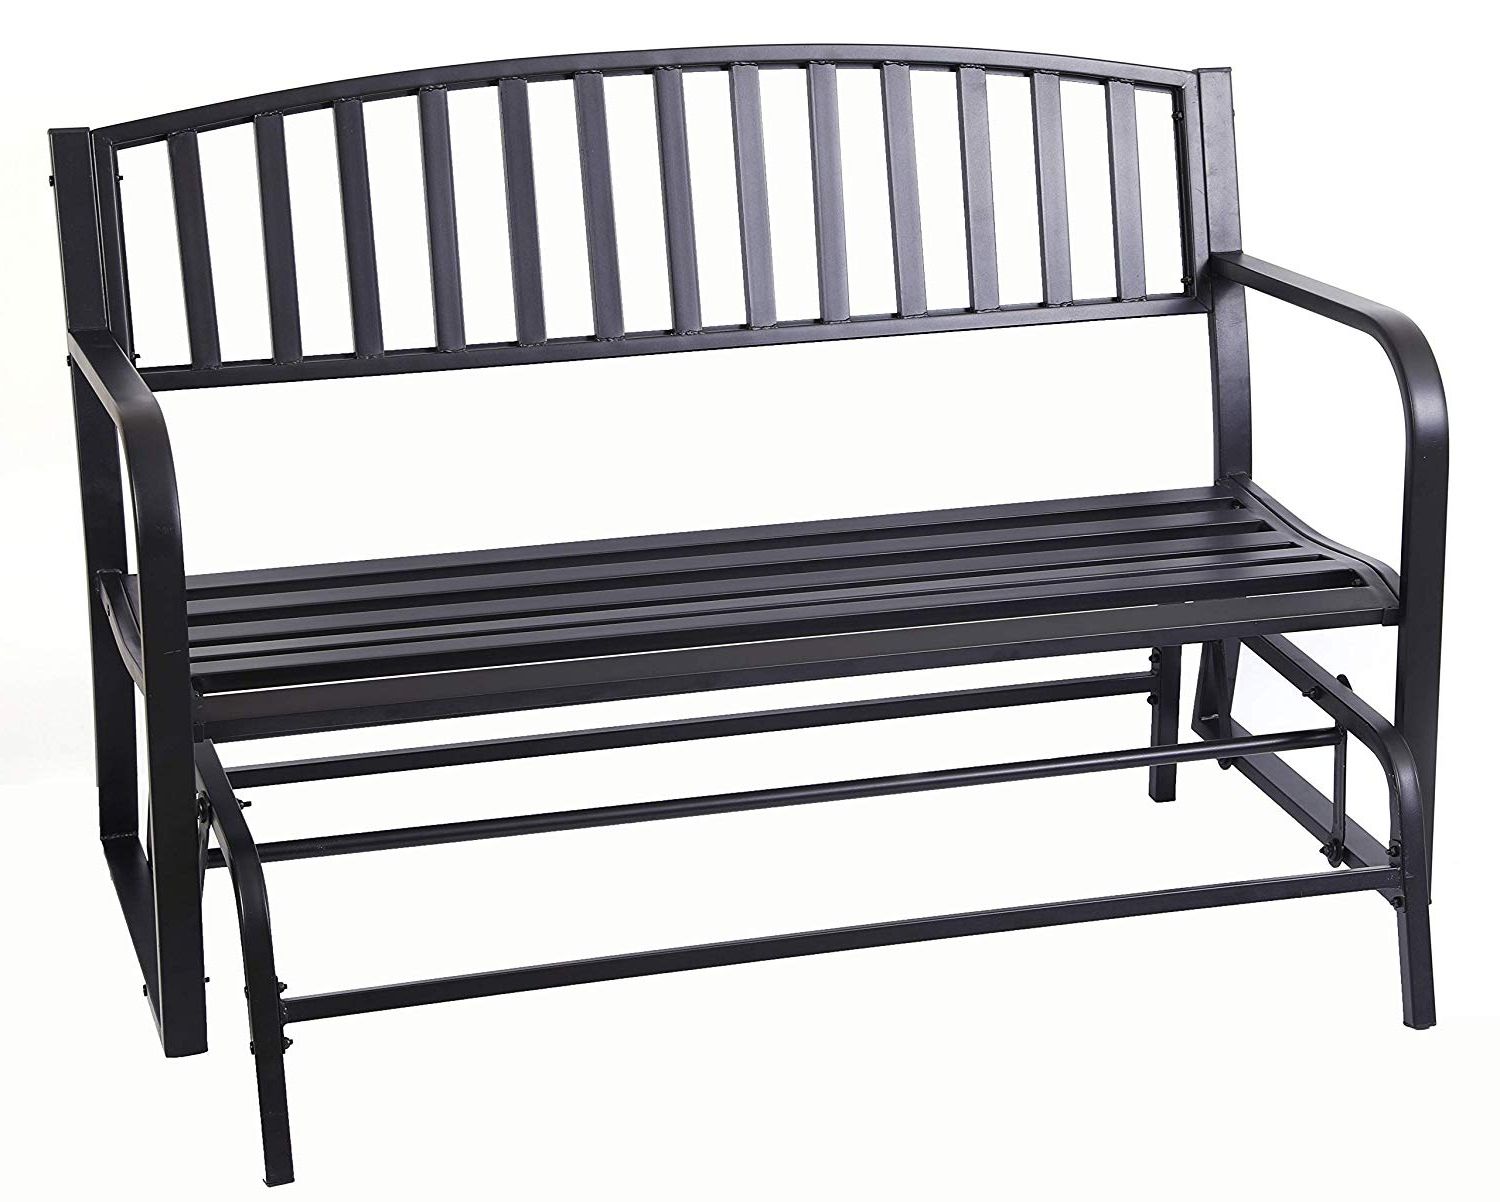 Recent Black Steel Patio Swing Glider Benches Powder Coated Inside Amazon : Gardenised Qi003392 Powder Coated Steel Patio (View 1 of 30)